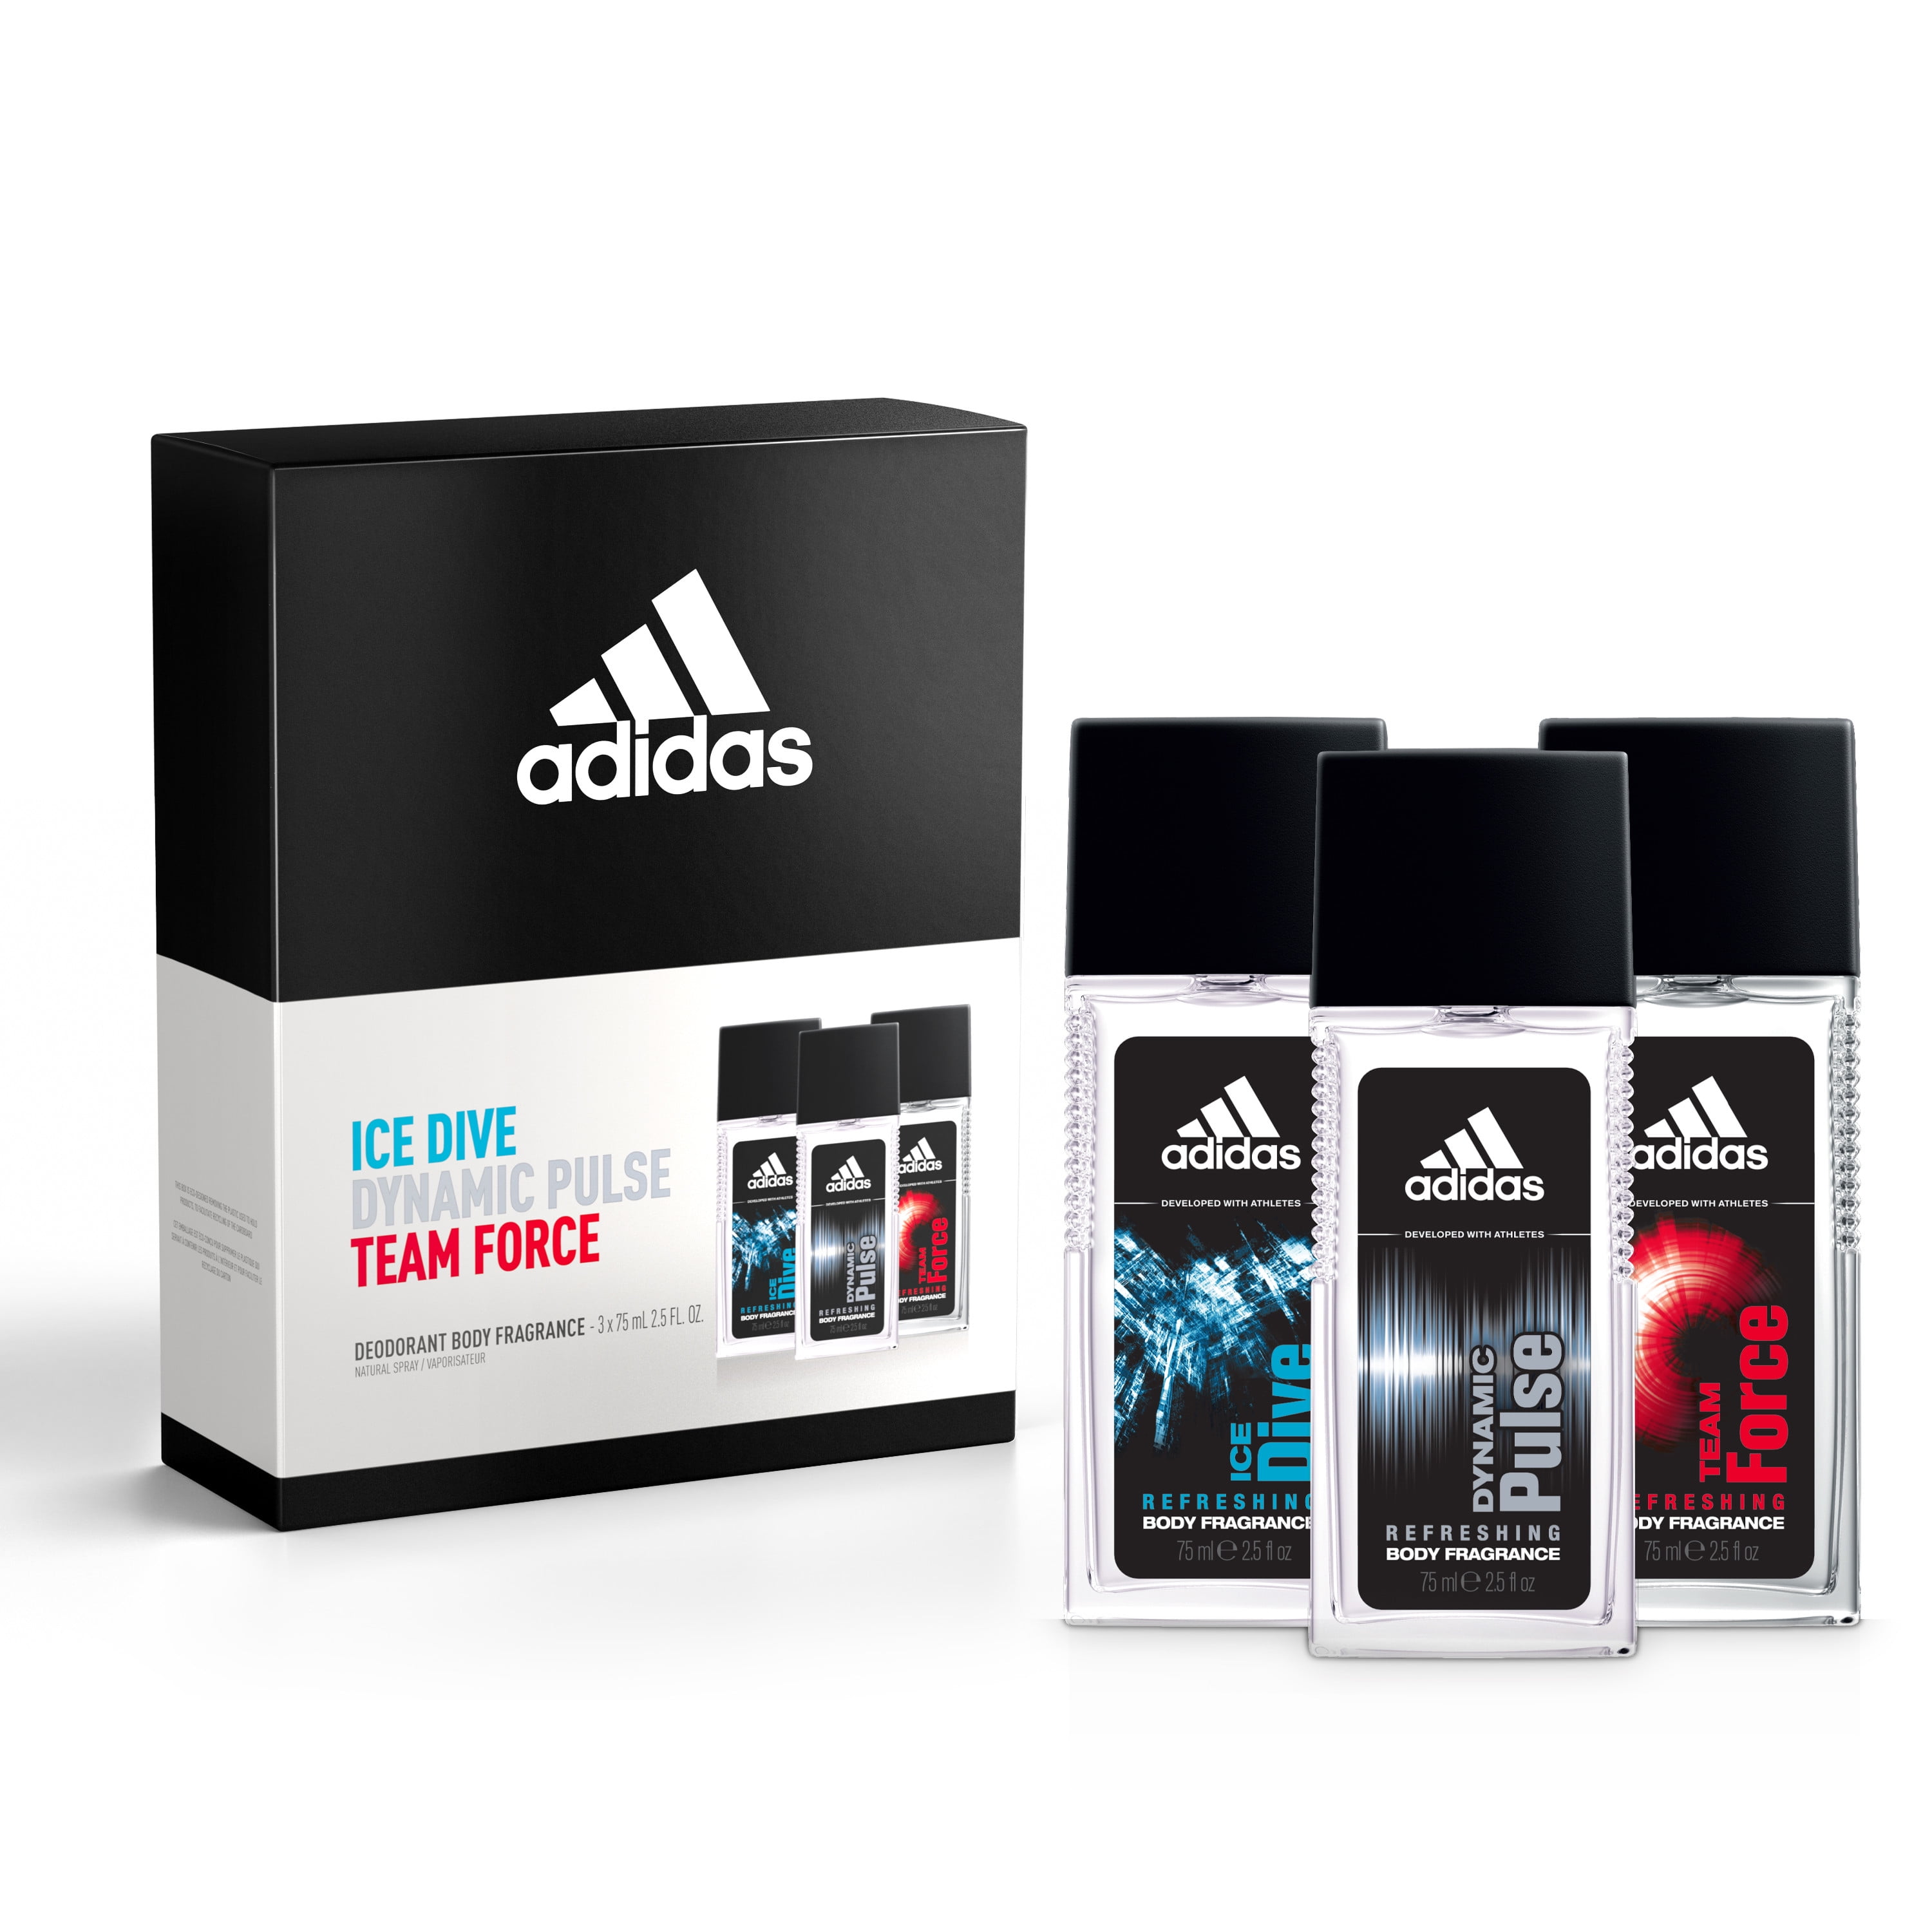 27 Value) ADIDAS Deodorant Body Fragrance Gift Set: Ice Dive + Dynamic Pulse Force, 3 Pieces Walmart.com